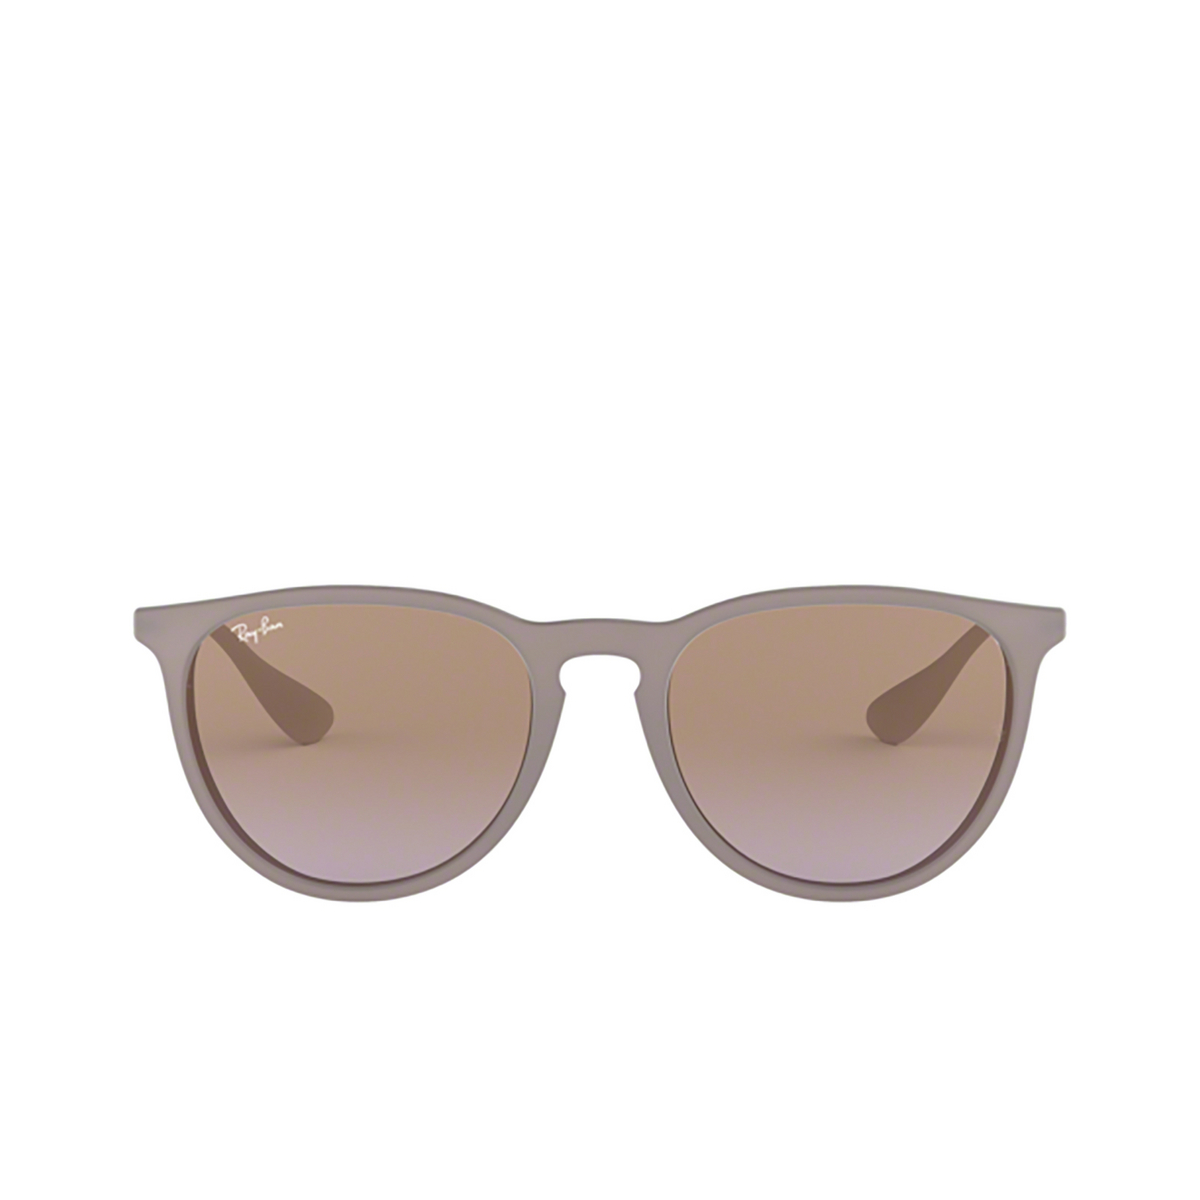 Ray-Ban ERIKA Sunglasses 600068 DARK RUBBER SAND - front view